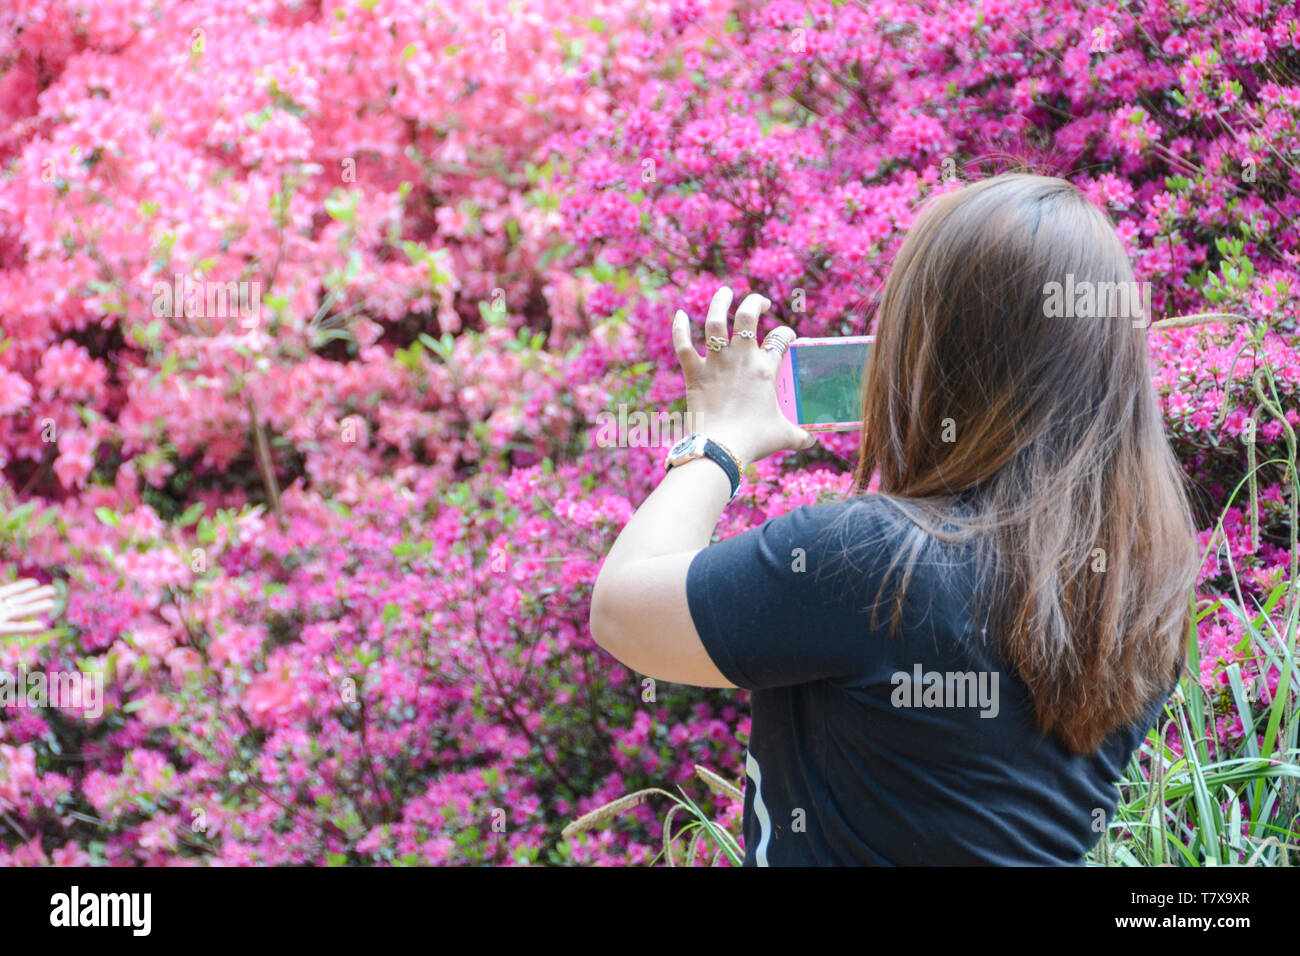 A young woman takes a picture on her smartphone of the colours and blossoms at the Isabella Plantation, Richmond Park, London, UK Stock Photo